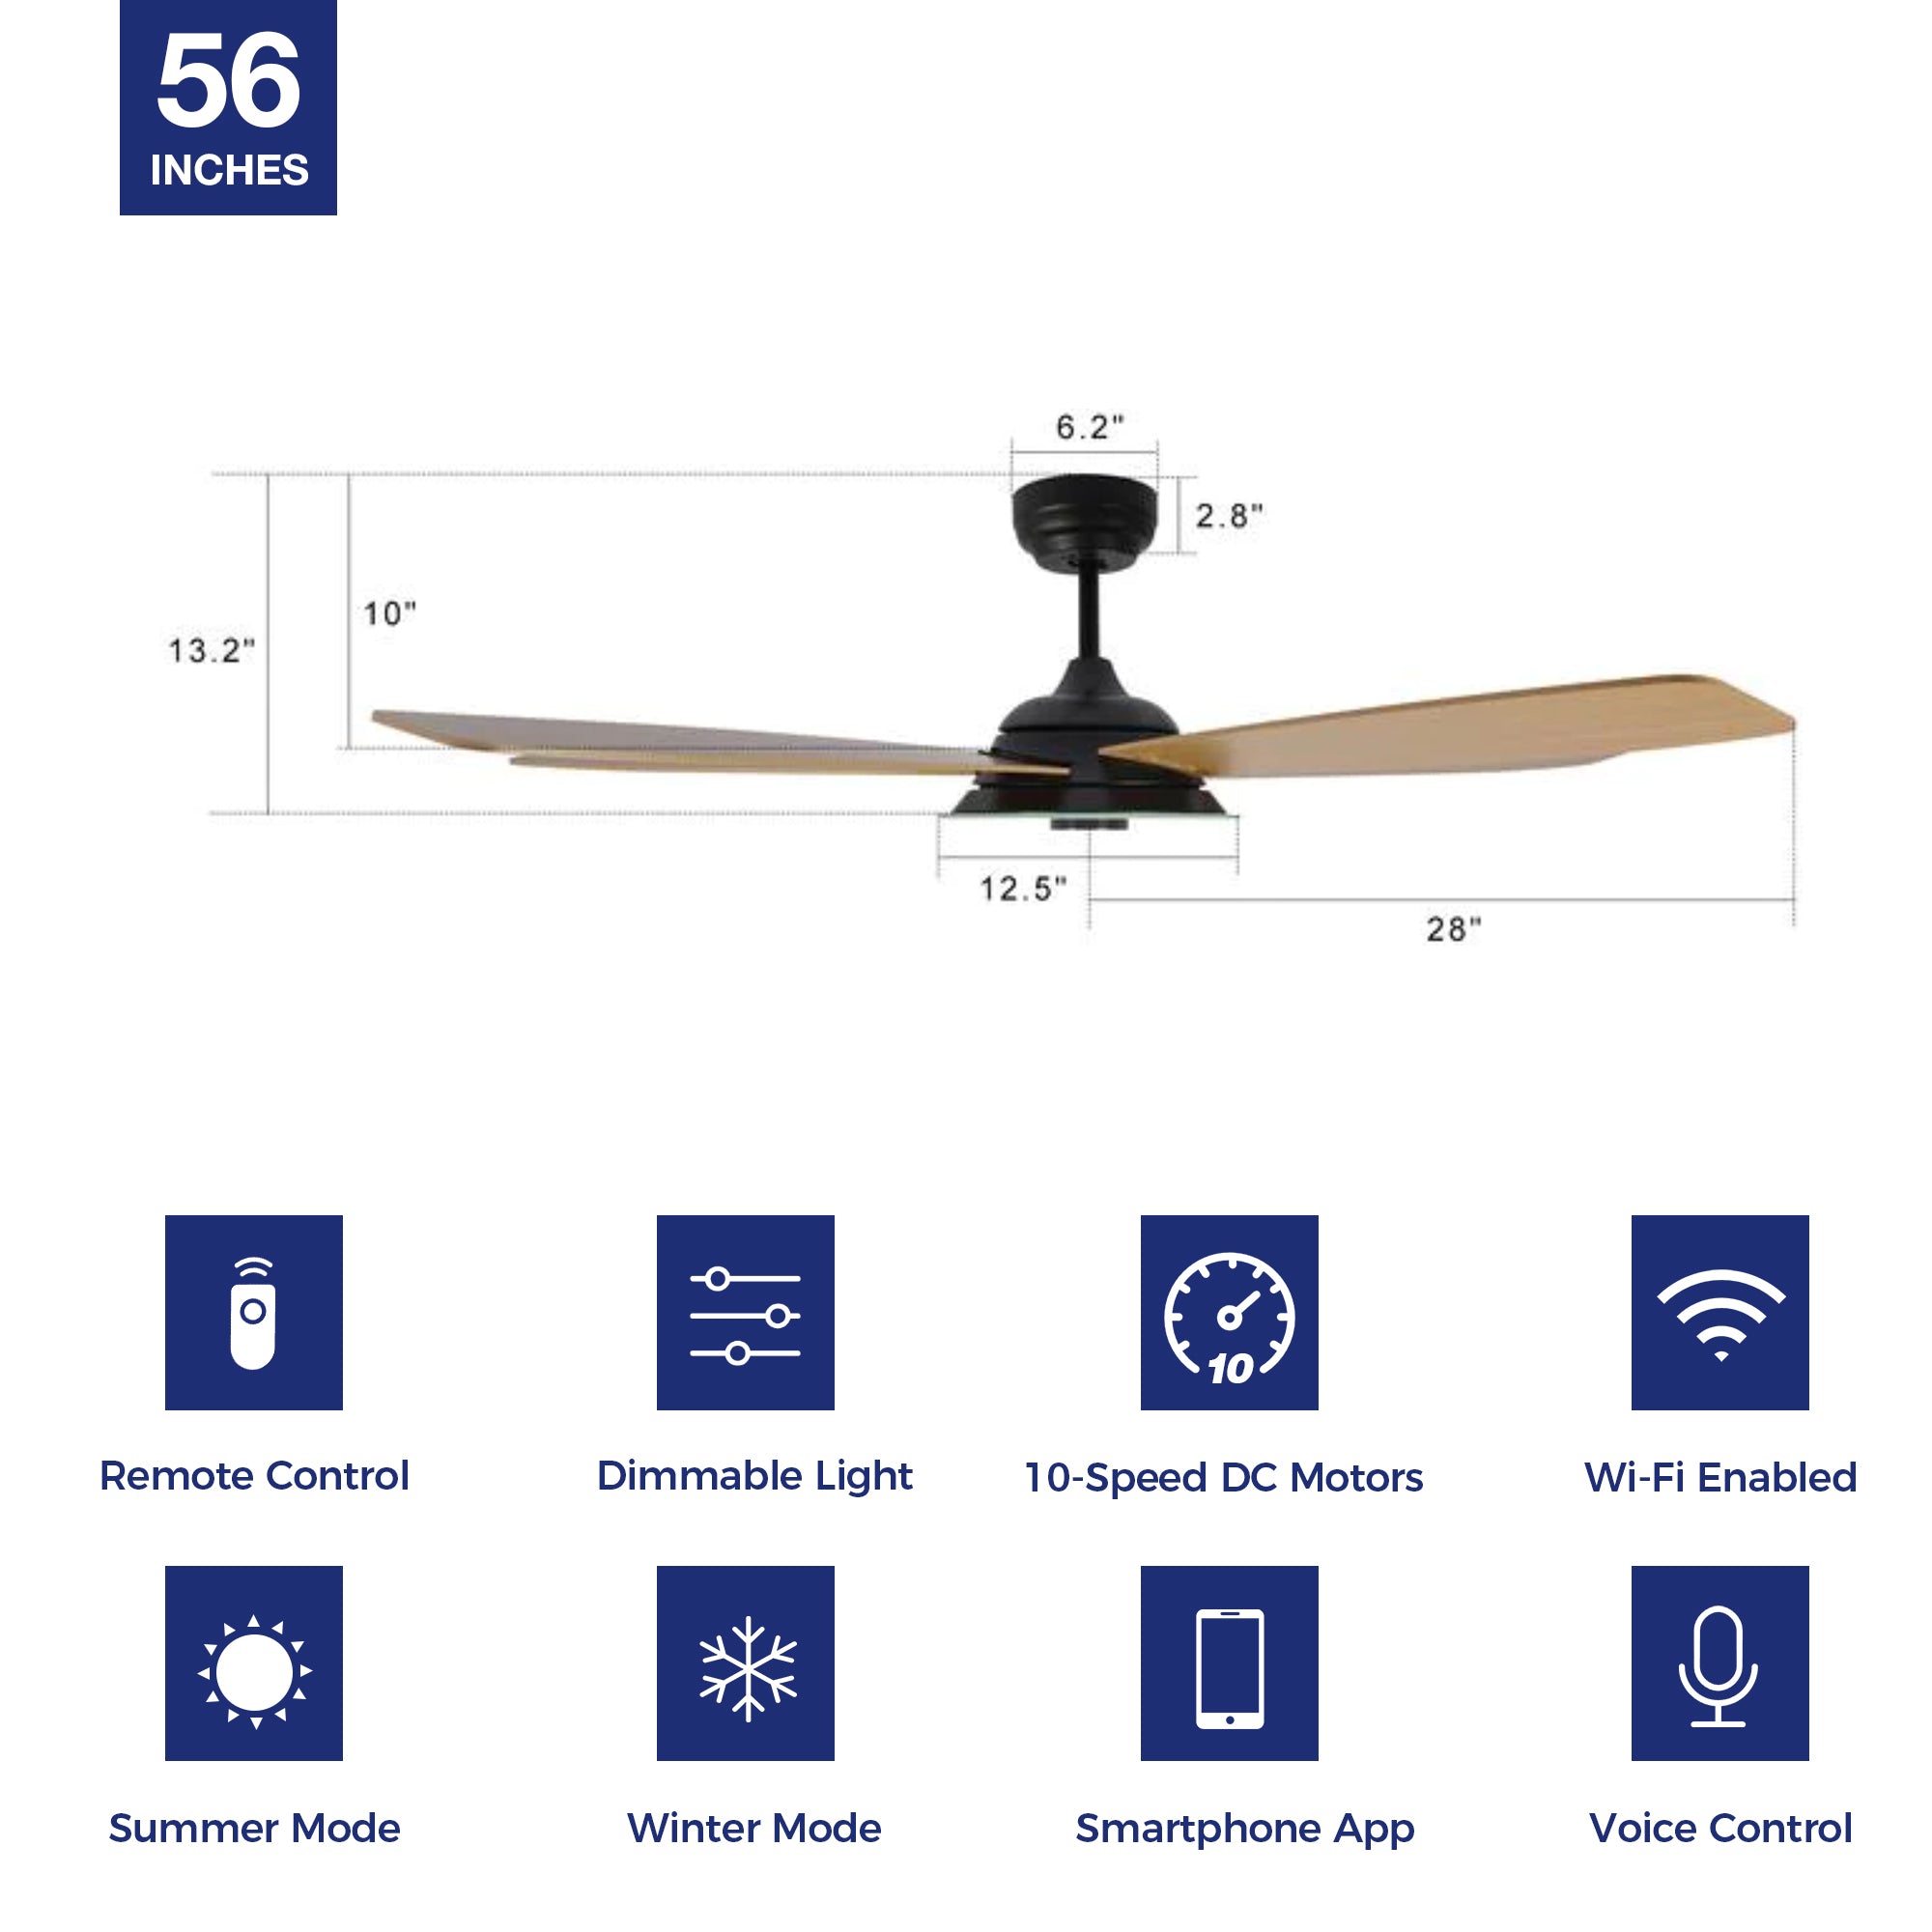 Striker Outdoor 56&quot; Smart Ceiling Fan with LED Light Kit-Black Case and Fine Wood Grain Fan Blades. The fan features Remote control, Wi-Fi apps, and Voice control technology (compatible with Amazon Alexa and Google Home Assistant ) to set fan preferences. Equipped with 3576-lumen dimmable LED lights and a 10-speed DC Motor (5600CFM airflow output), it brings you cool and bright. 